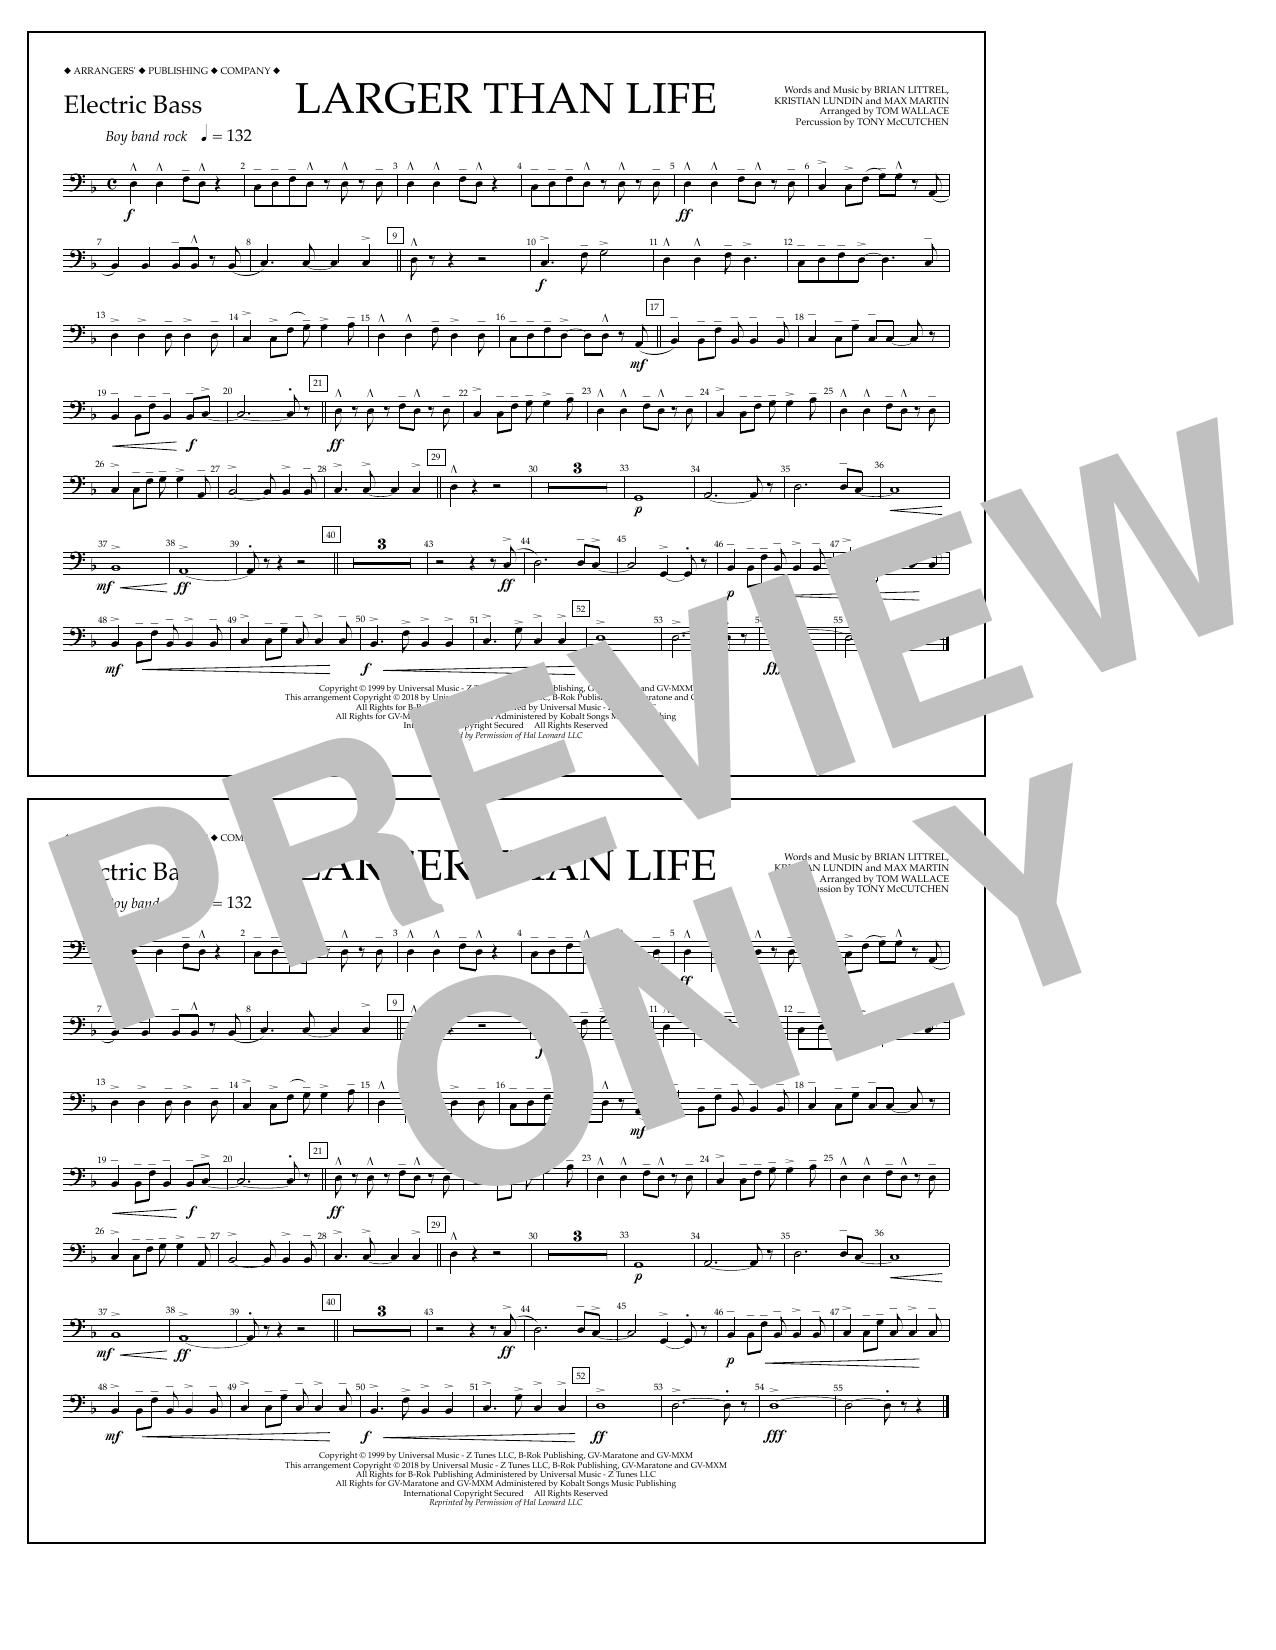 Download Tom Wallace Larger Than Life - Electric Bass Sheet Music